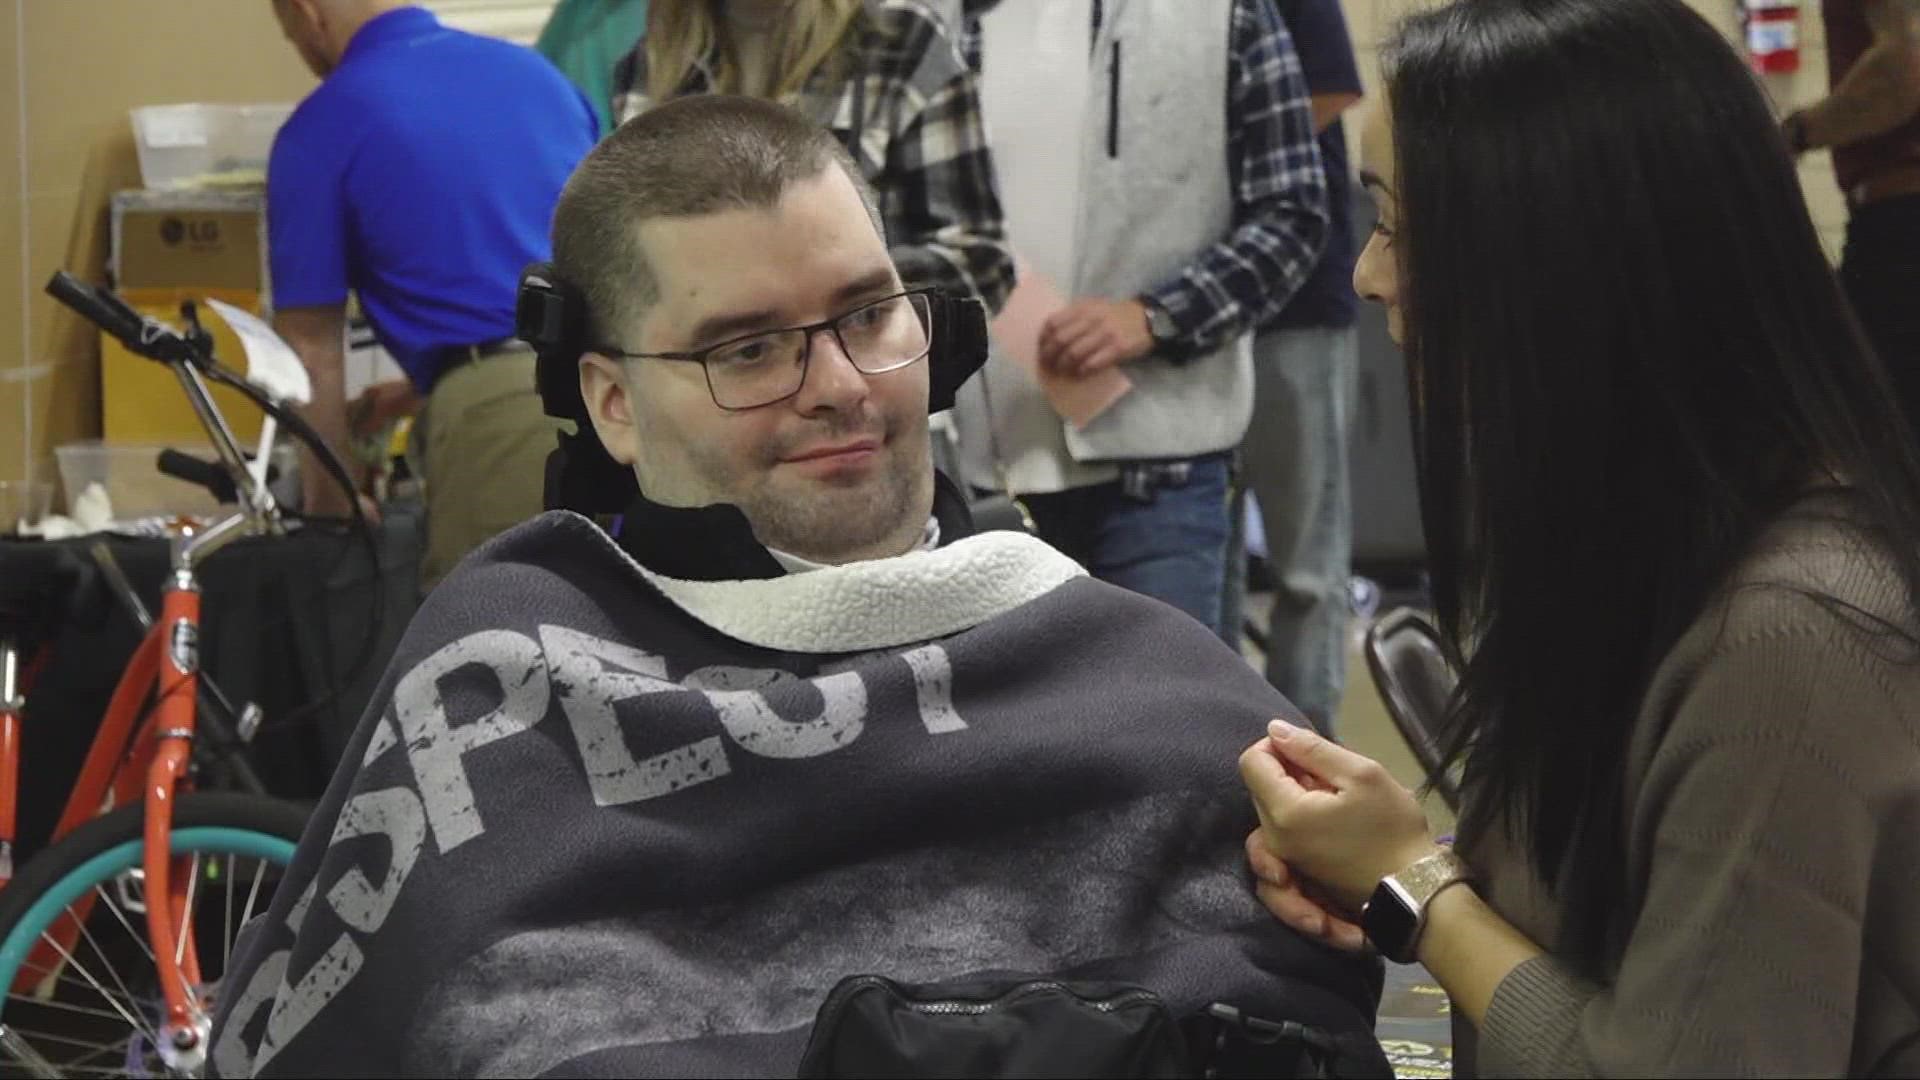 Hundreds of people showed up to a fundraiser the goal: $50,000 for potentially life-changing surgery.